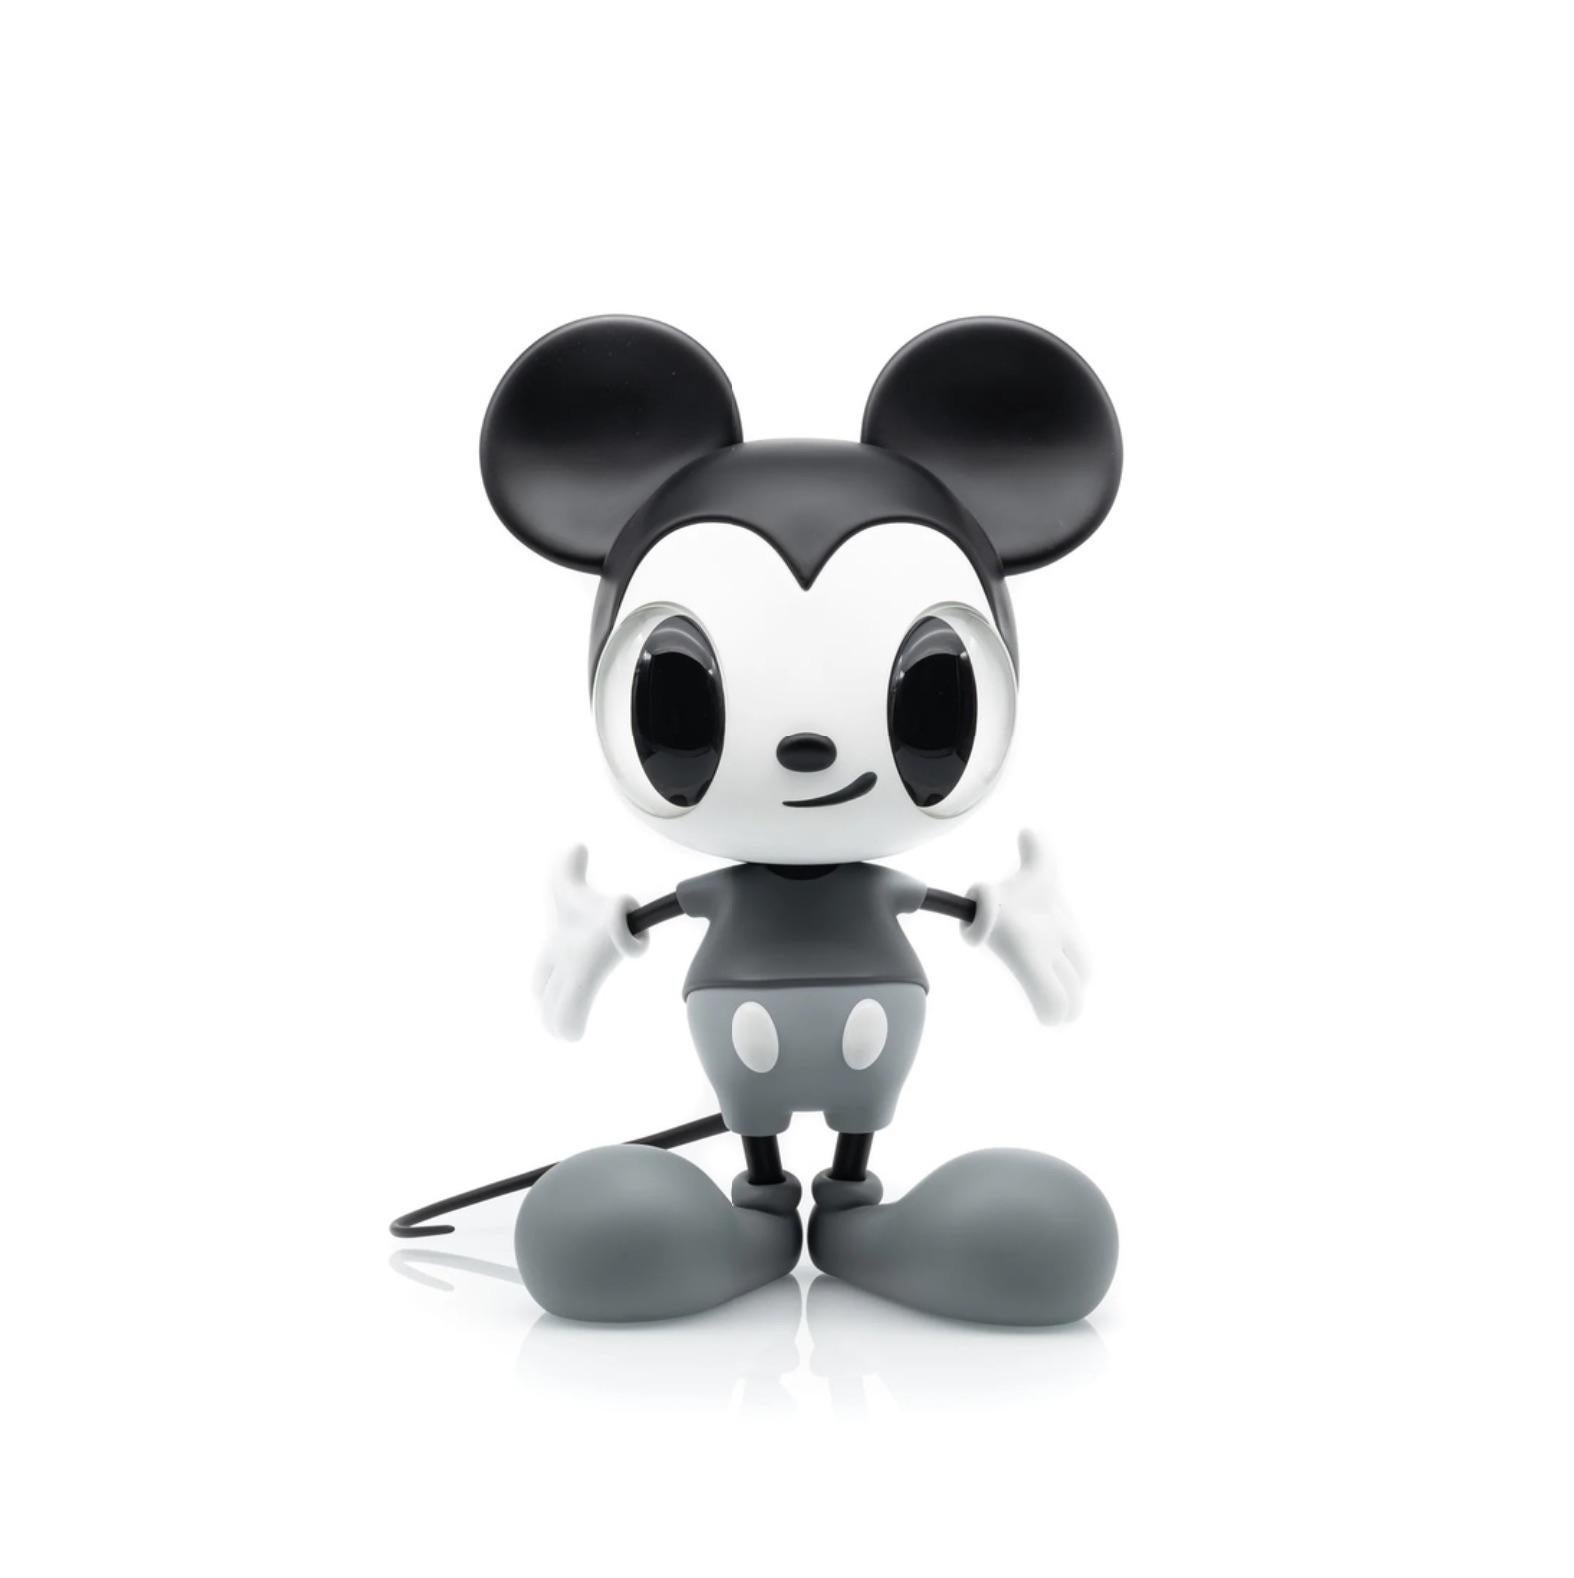 Javier Calleja
Little Mickey Grey, 2022
Polyvinyl Chloride & Crystal Glass
12 × 10 × 8 in | 30.5 × 25.4 × 20.3 cm
Edition of 350